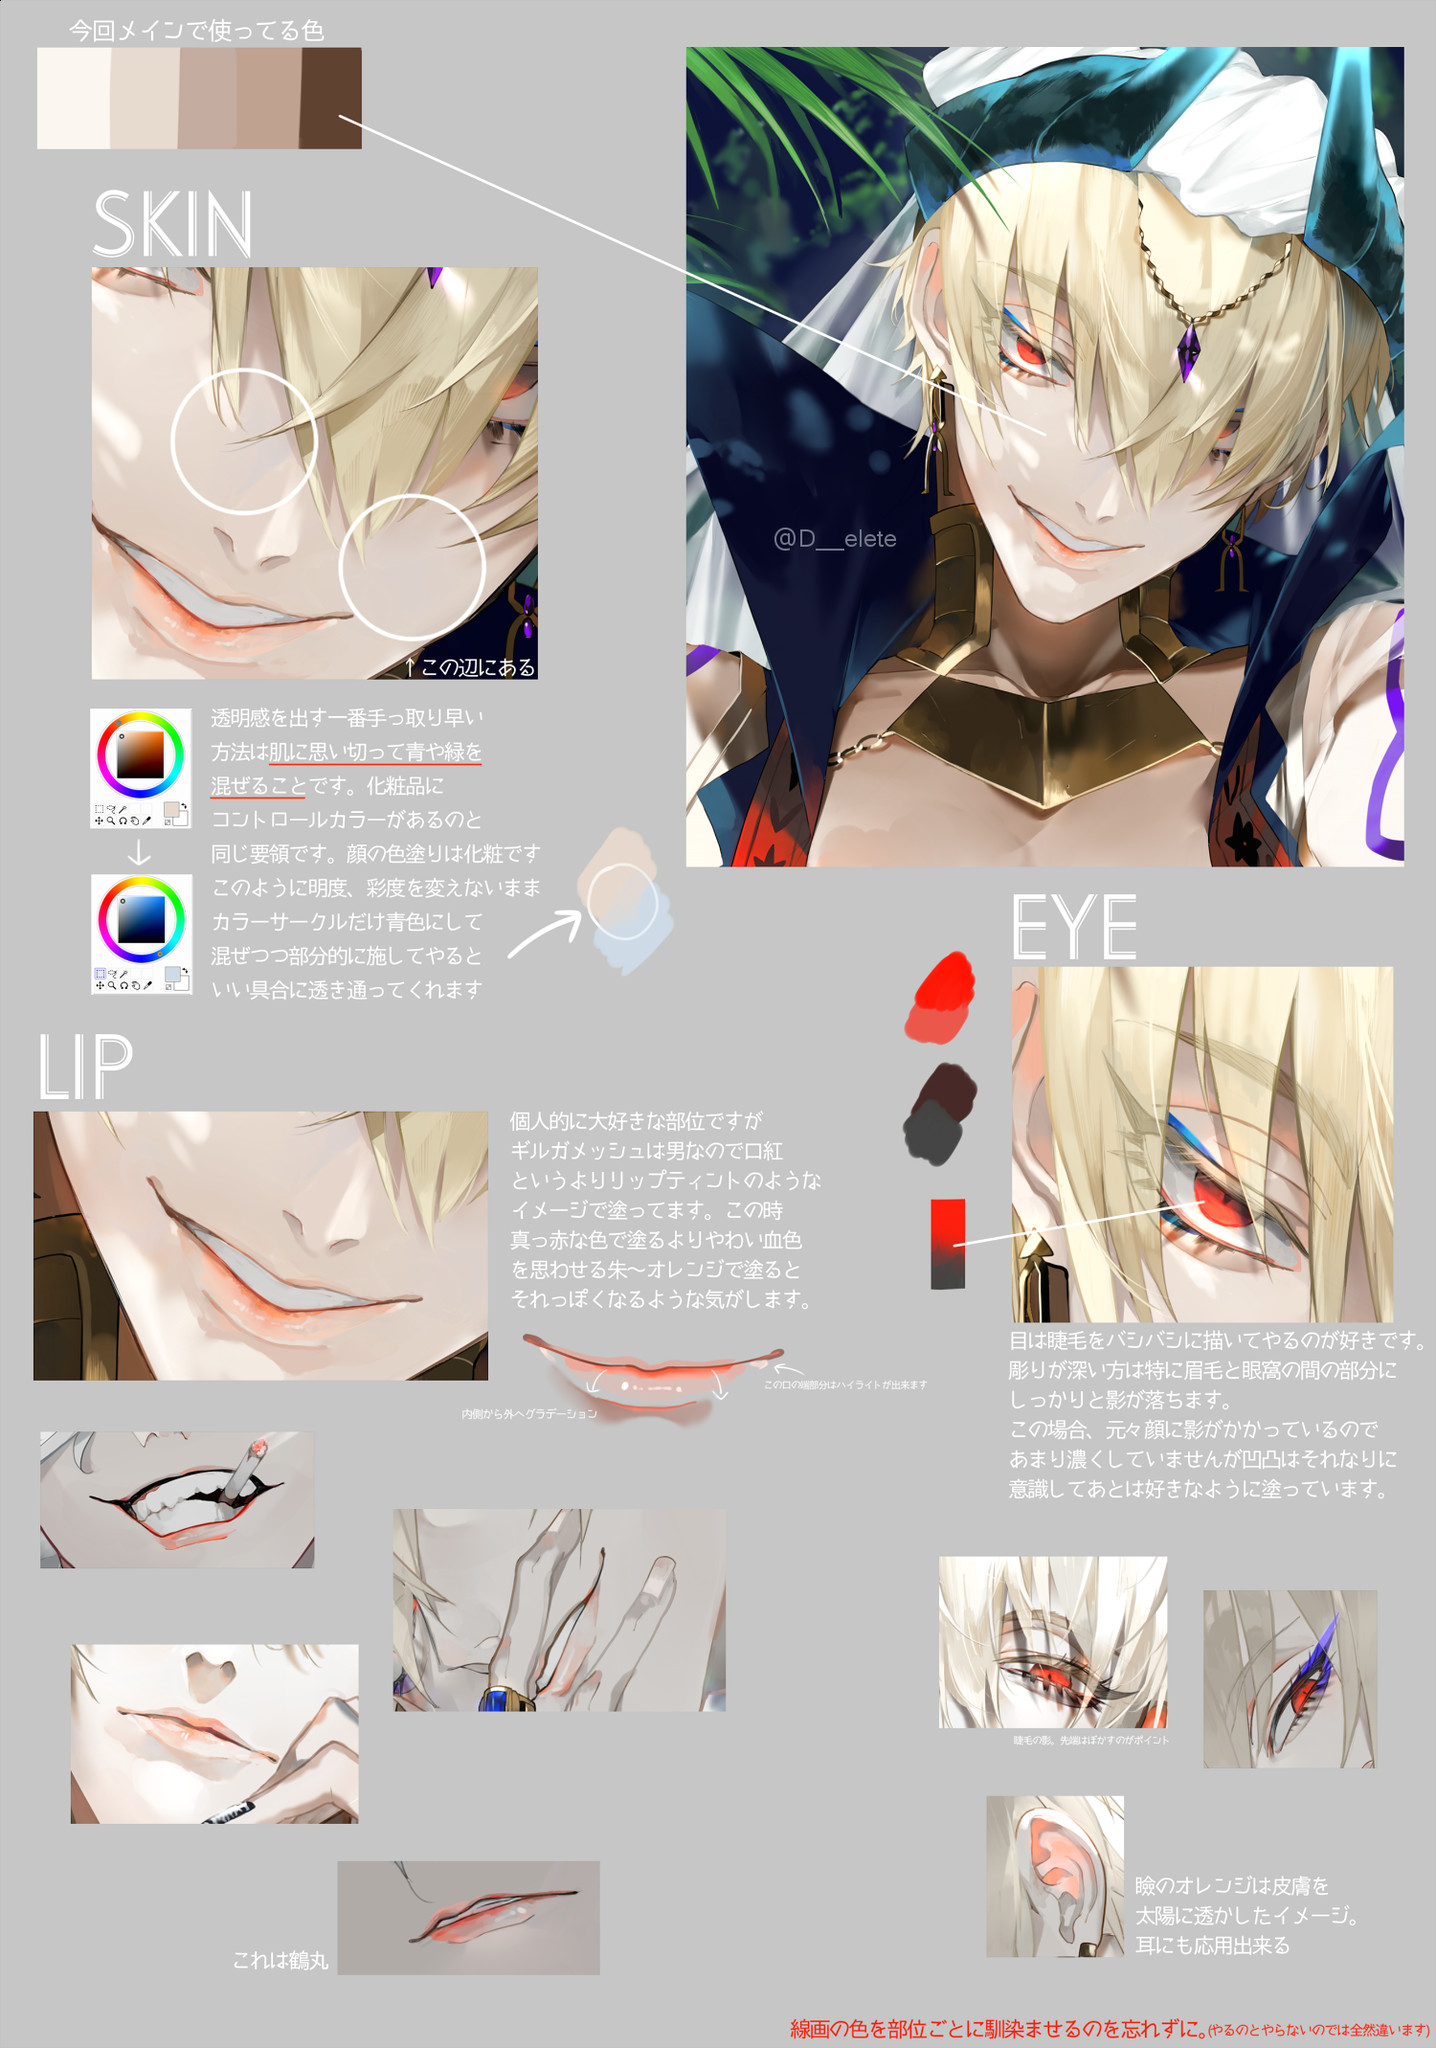 Anime Drawing Tutorial Digital Pin by Cherilyn On Painting Reference Pinterest Drawings Art